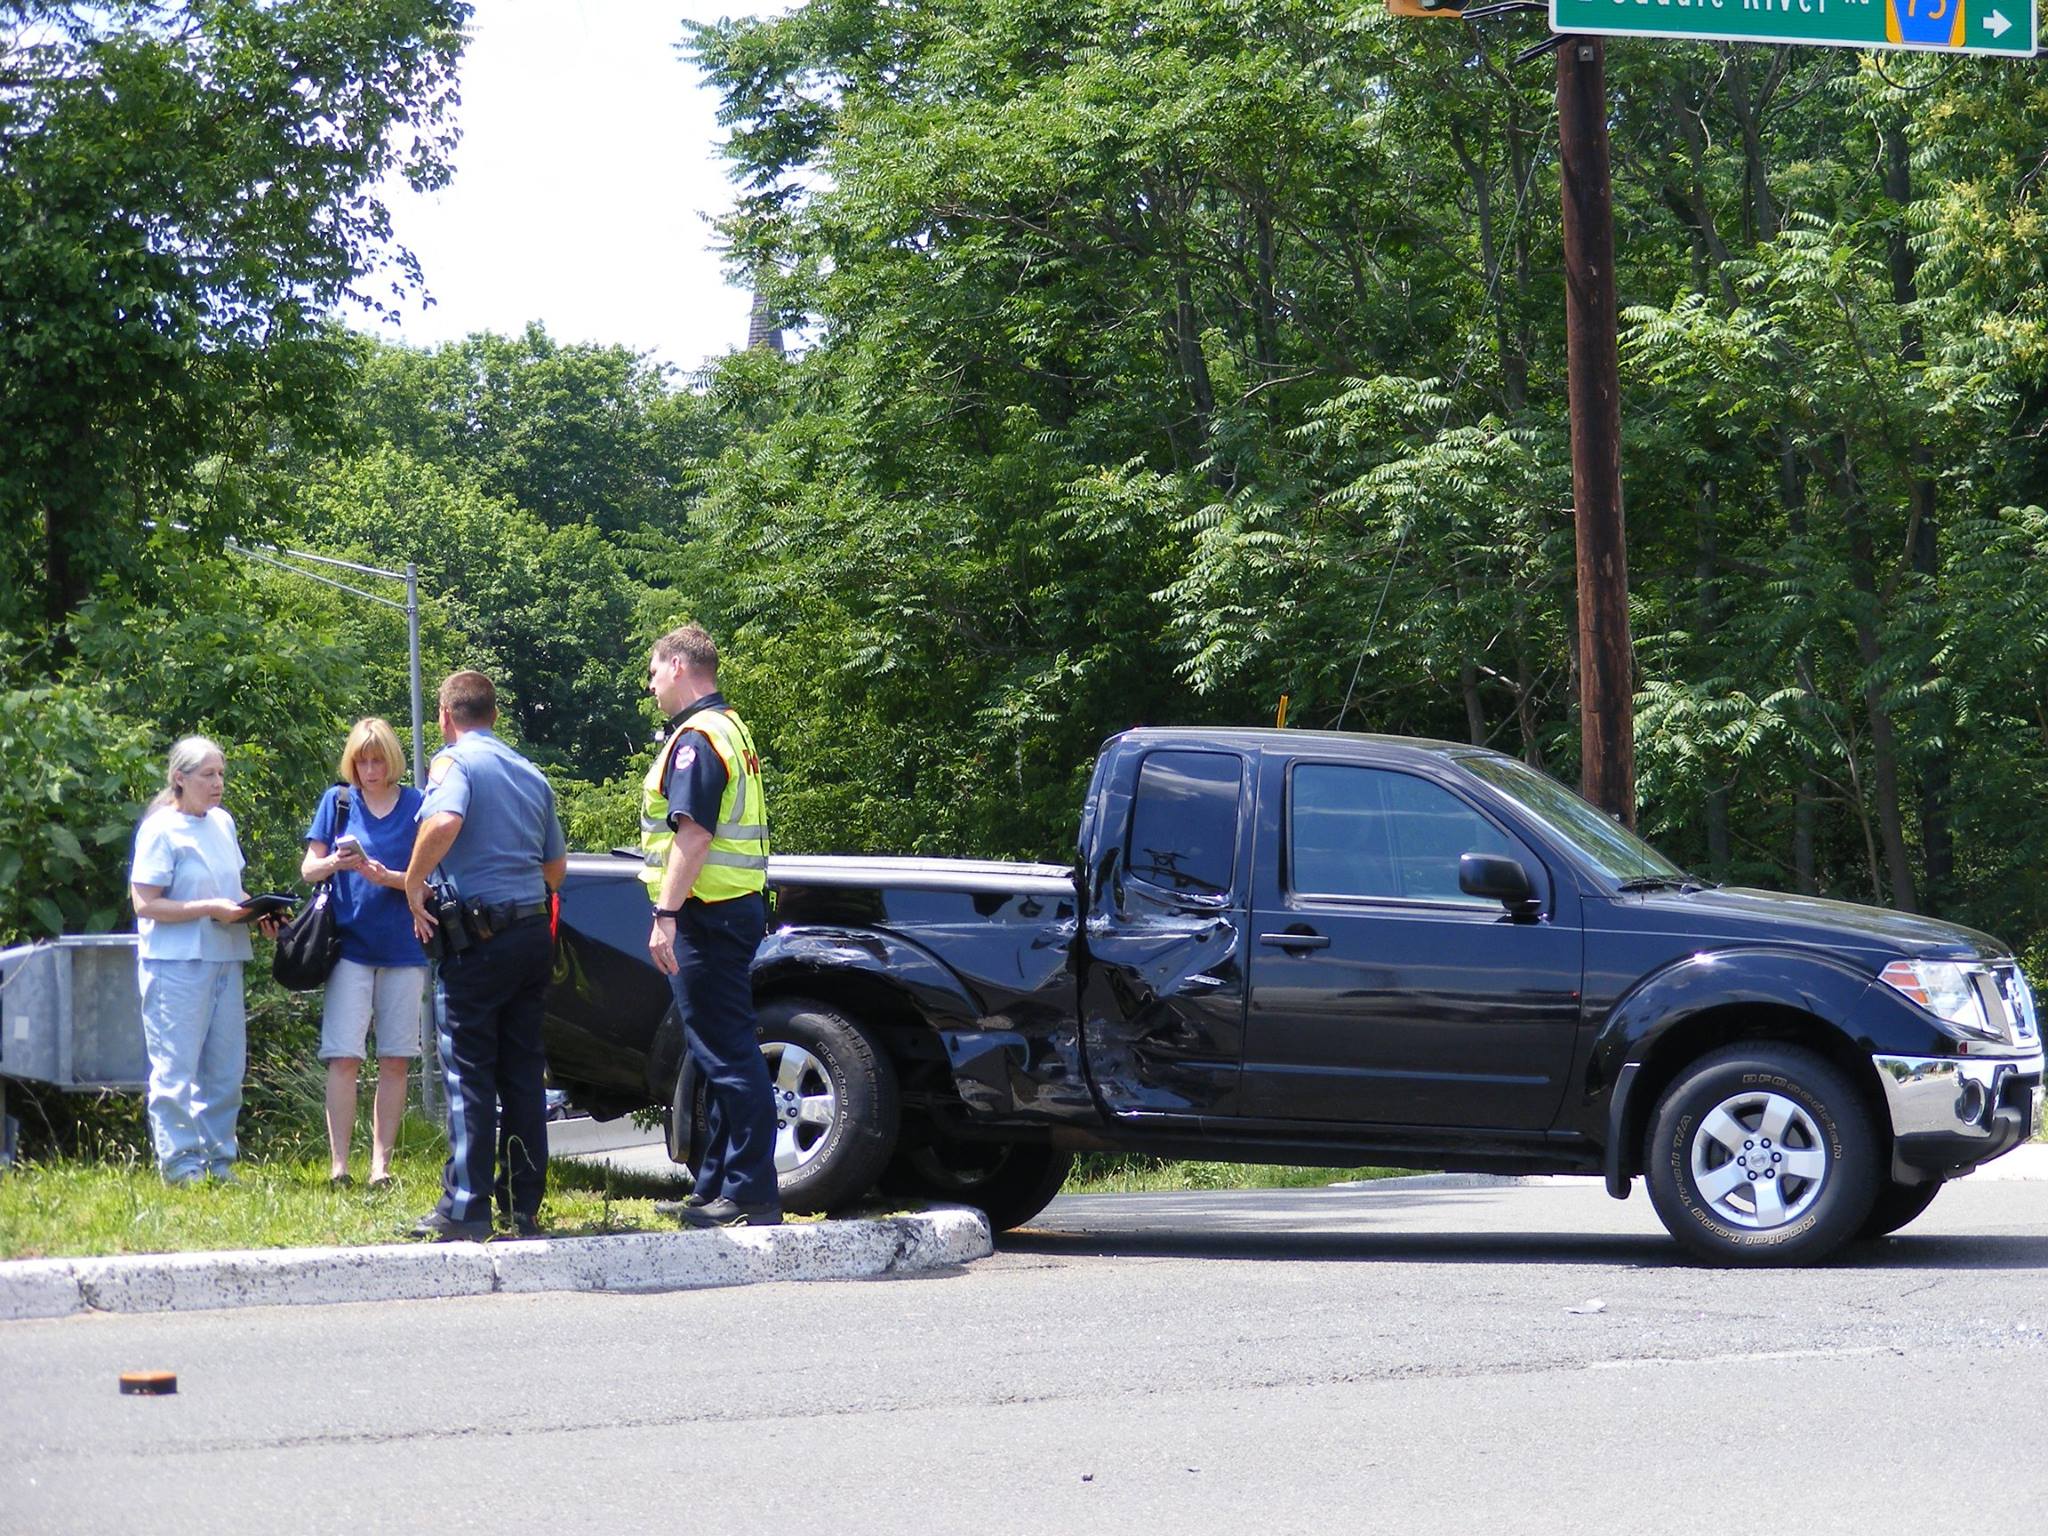 Pickup and Landscaping Truck Collision on East Glen Avenue and Paramus Road in Ridgewood